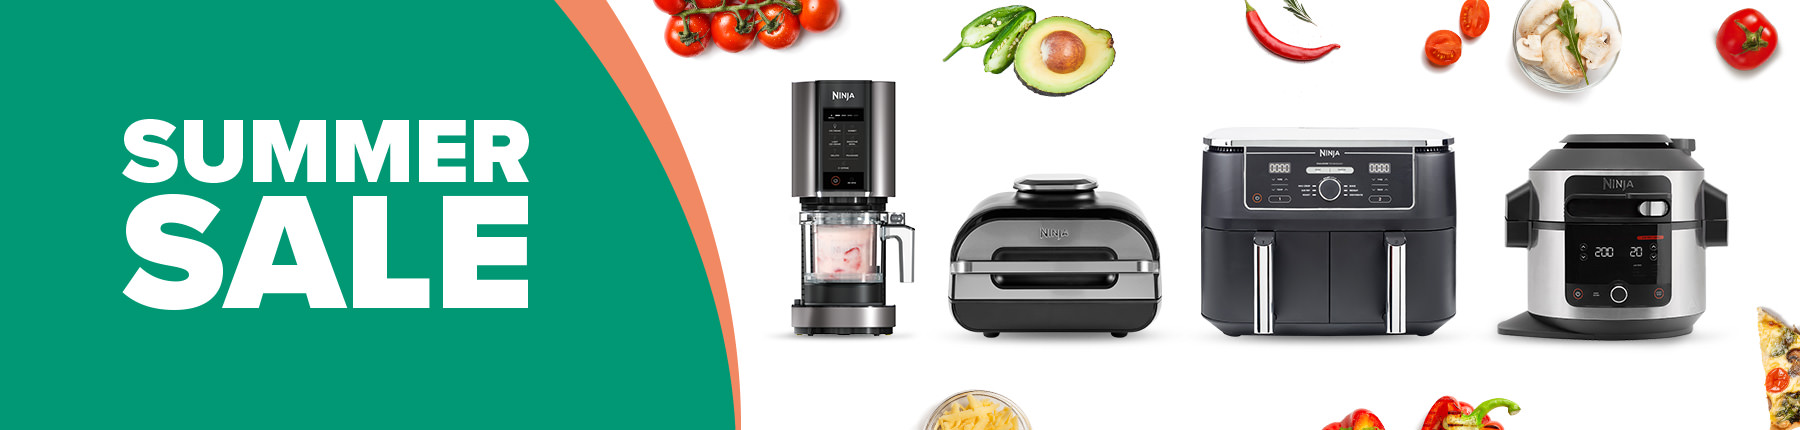 From blenders to multicookers, discover the Ninja products that are currently on offer